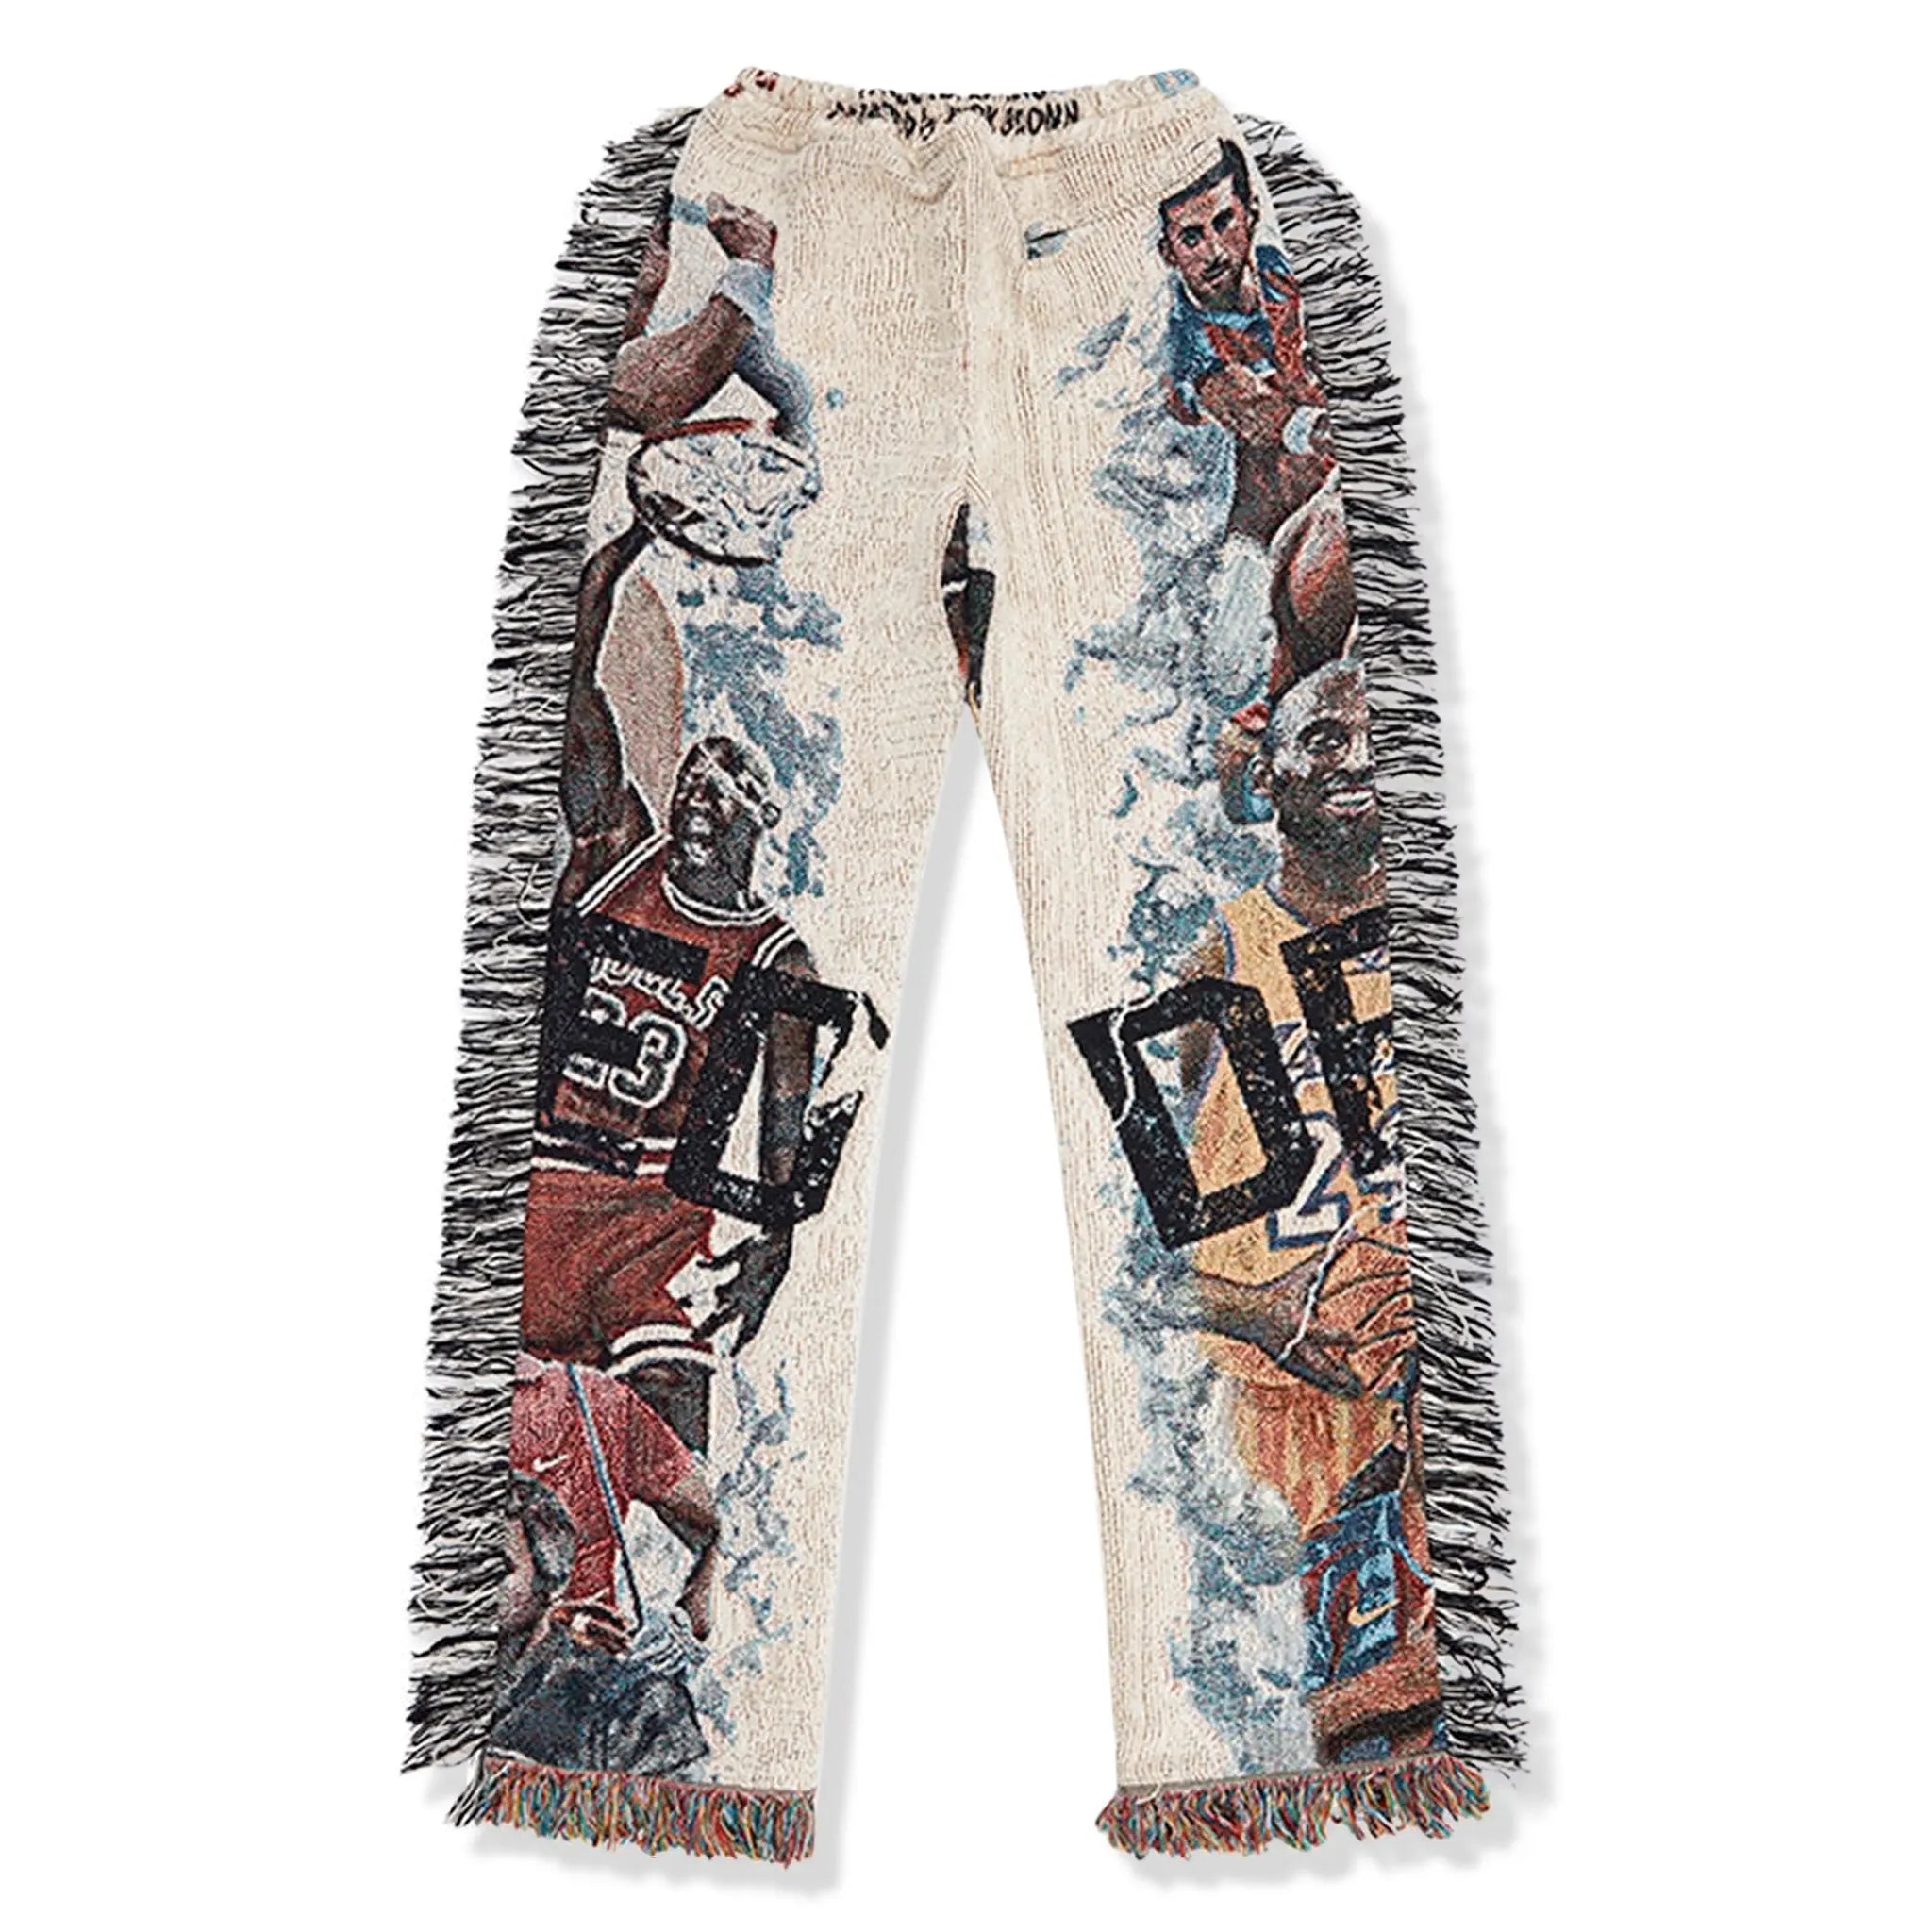 Back view of Dedictd G.O.A.T Tapestry Pants